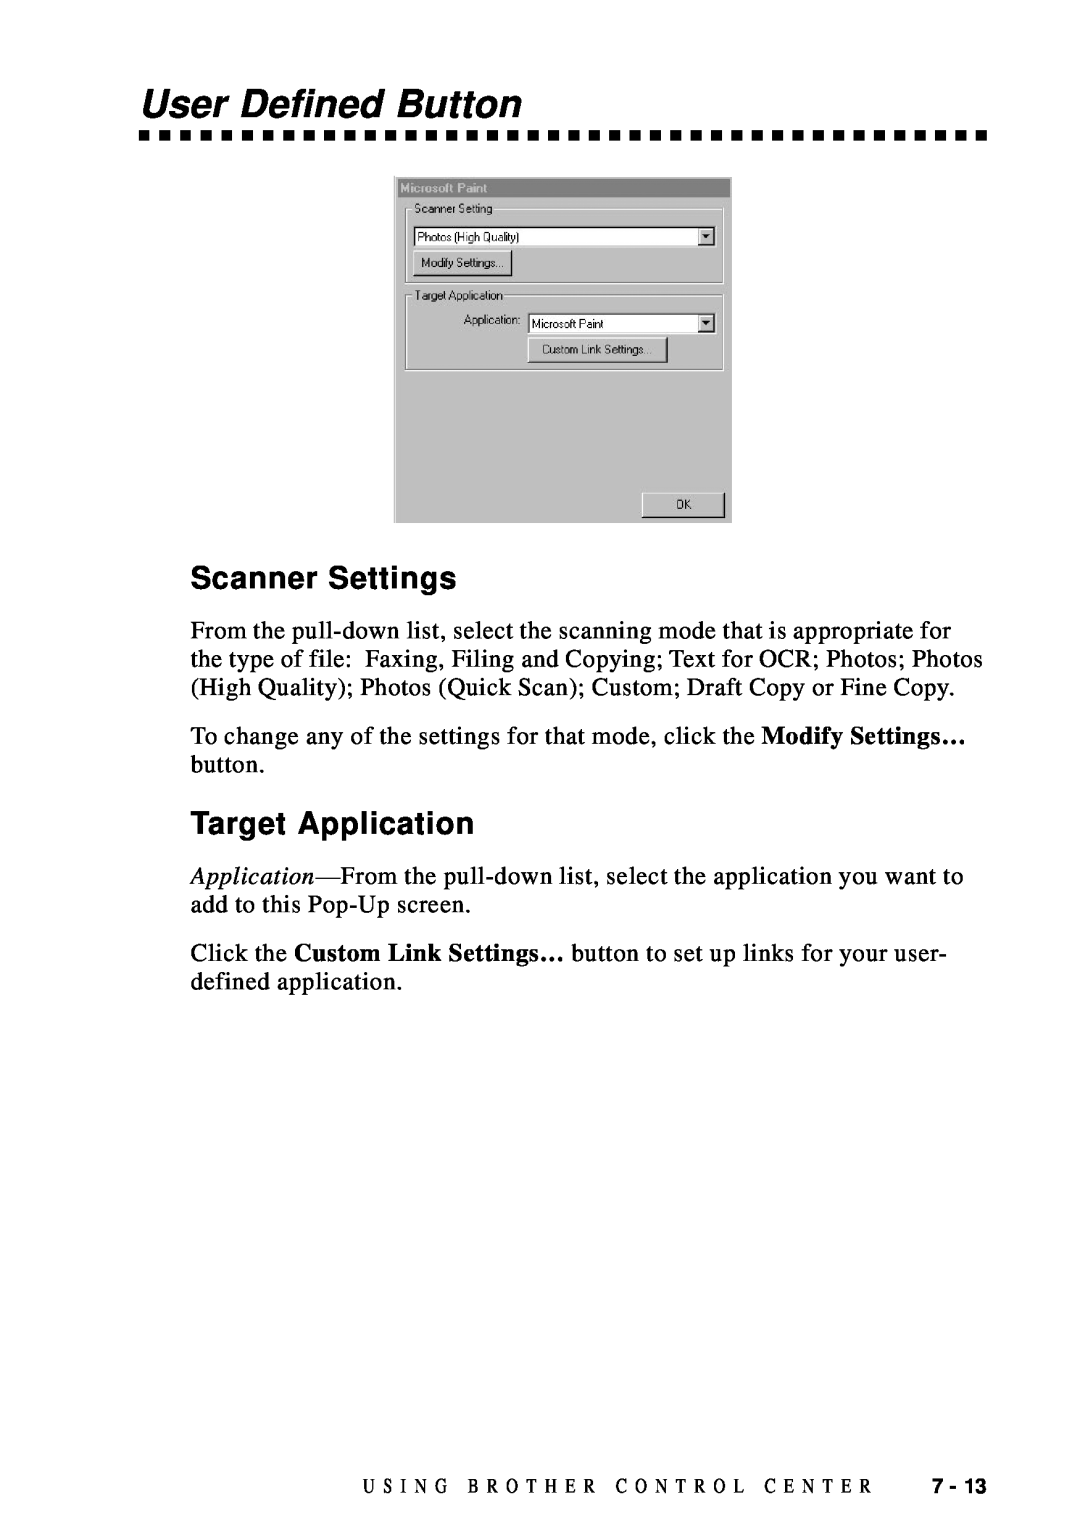 Brother DCP1200 manual User Defined Button, Target Application, Scanner Settings 